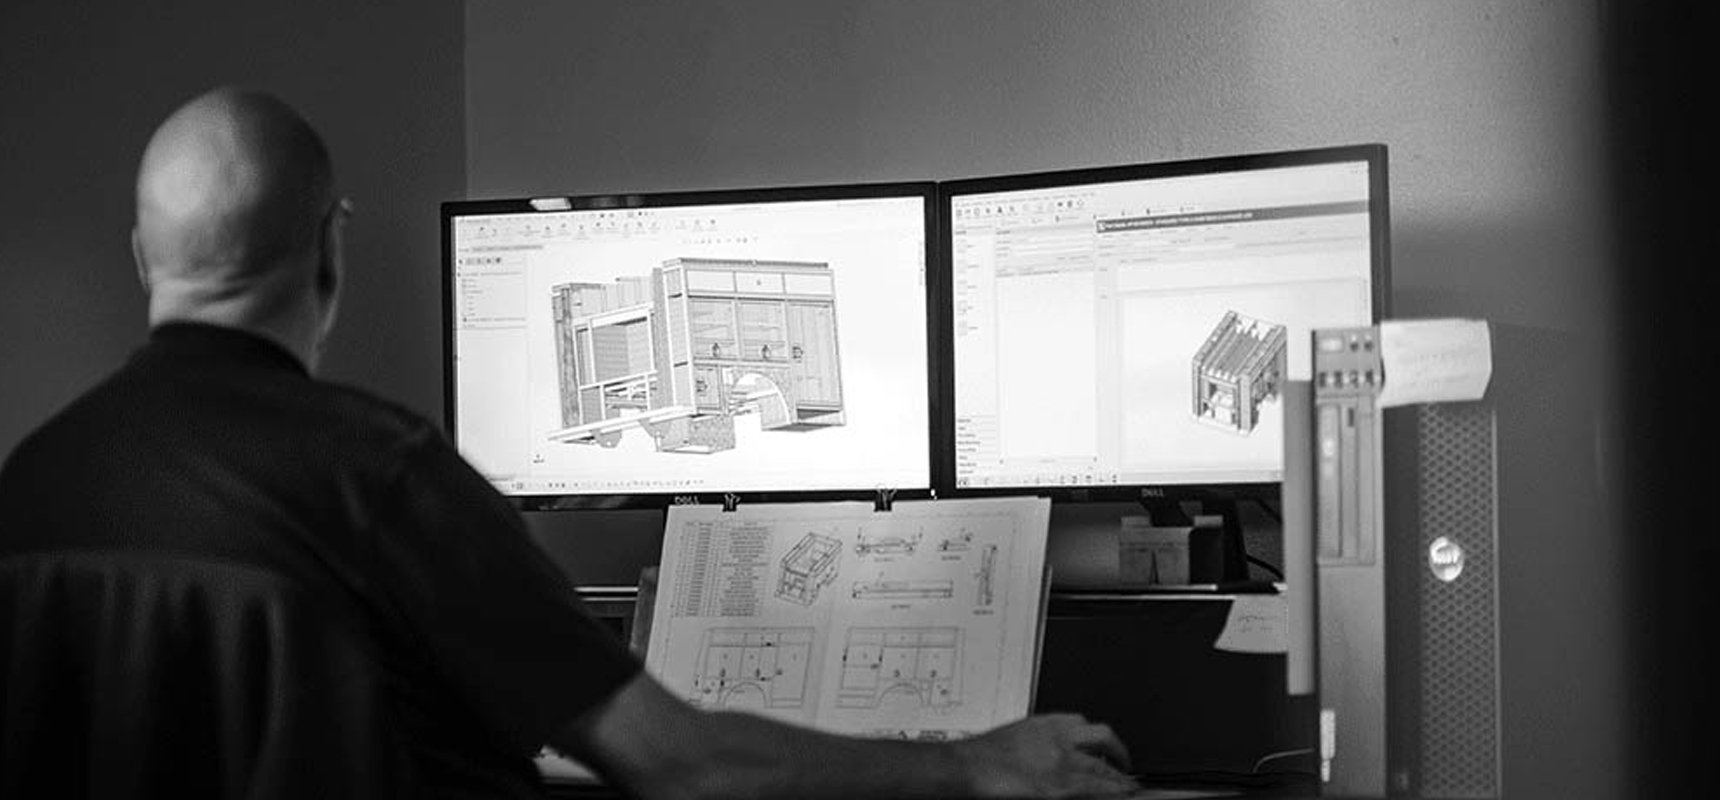 A black and white photo shows a man in a black shirt sitting at a desk looking at two screens with wildland fire truck renderings and a paper document with additional schematics. 